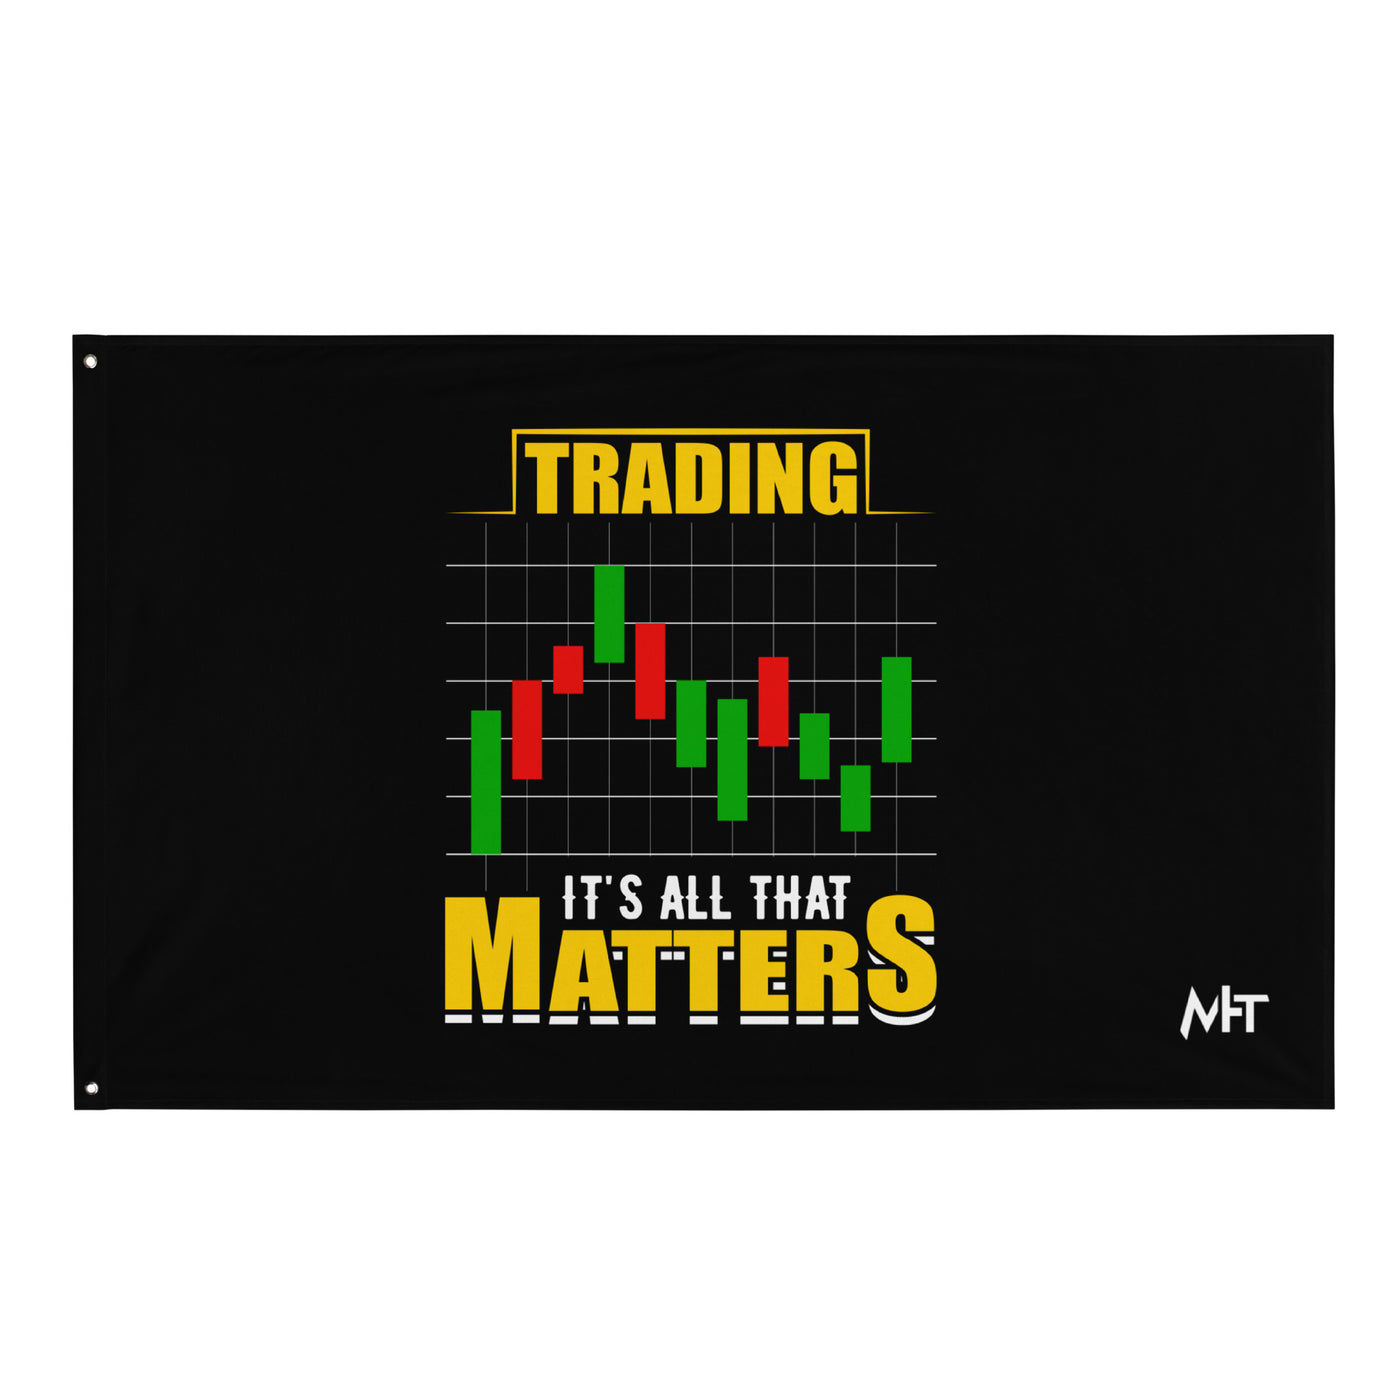 Trading; It's all that Matters V1 - Flag